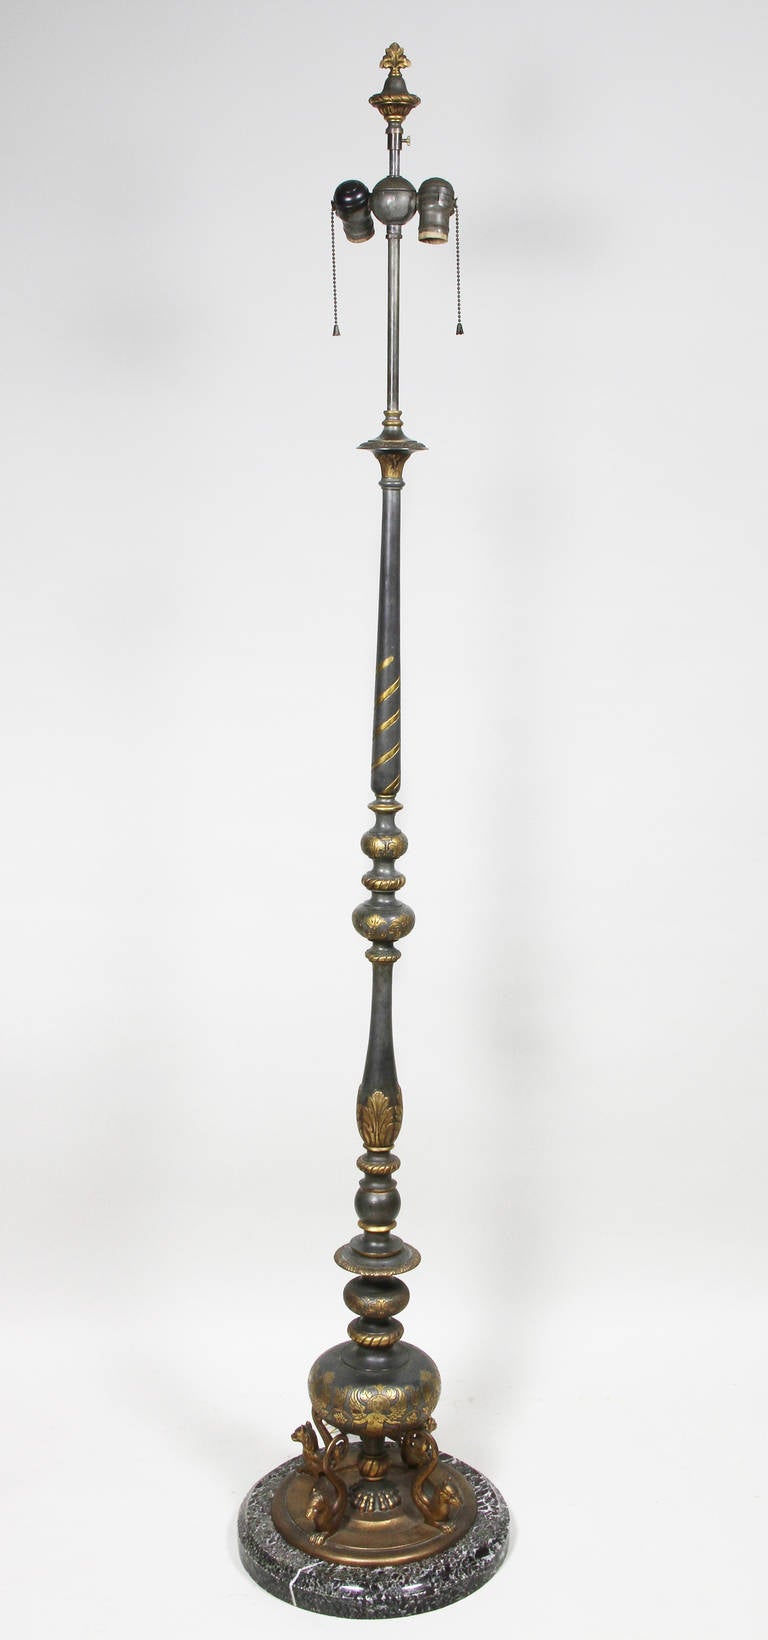 Attributed to Caldwell with pewter and gilt finish to decoration , turned support decorated with leaves and winged figures. Figural animal supports and marble base.